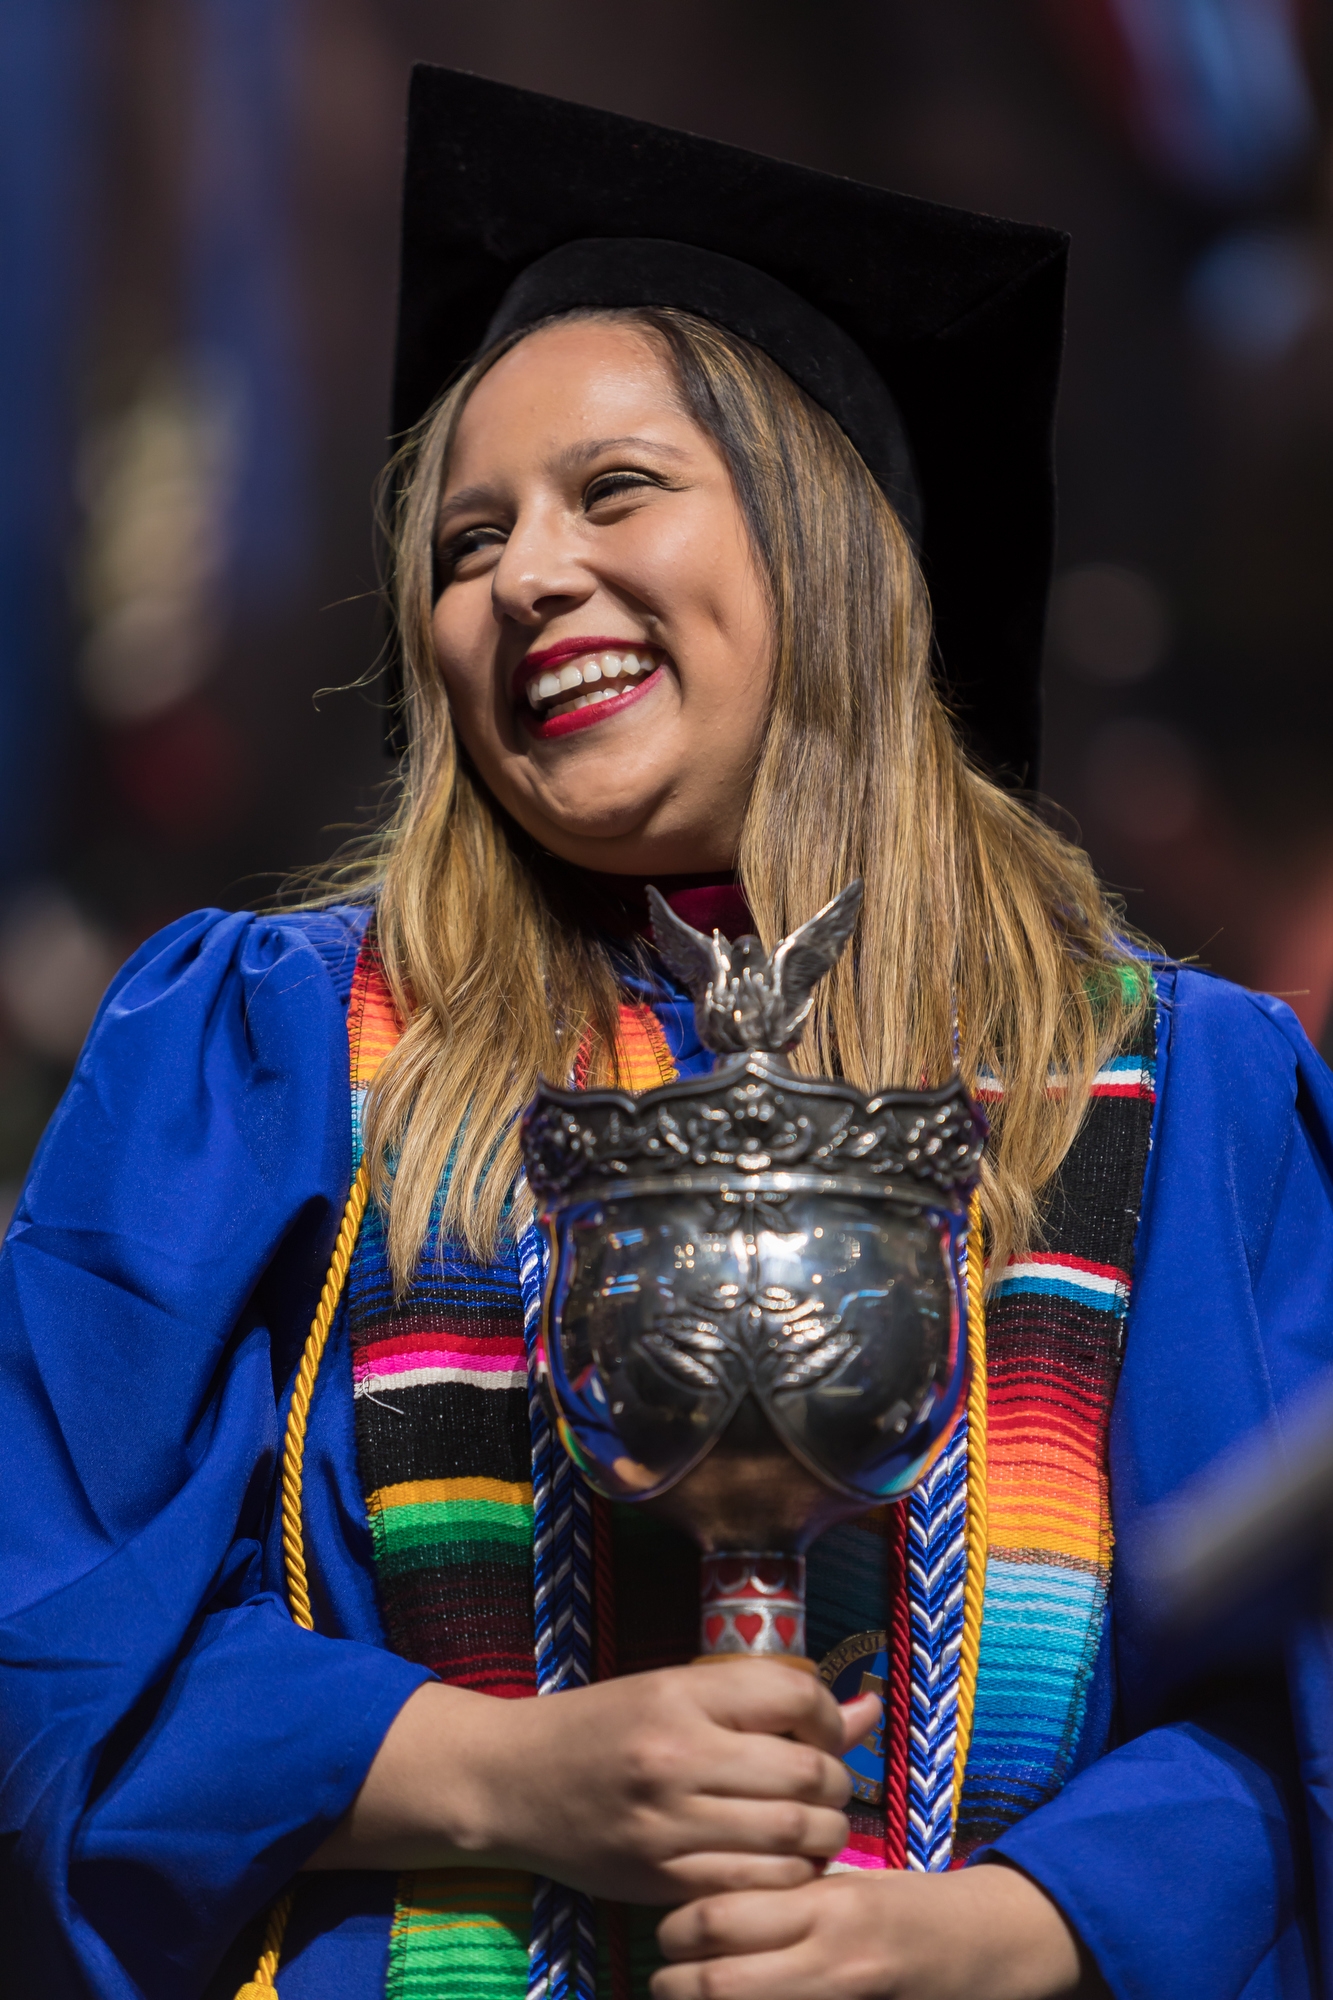 Graciela Covarrubias leads the procession with the university mace to begin the commencement ceremony for the College of Communication and the College of Computing and Digital Media. (DePaul University/Jeff Carrion)